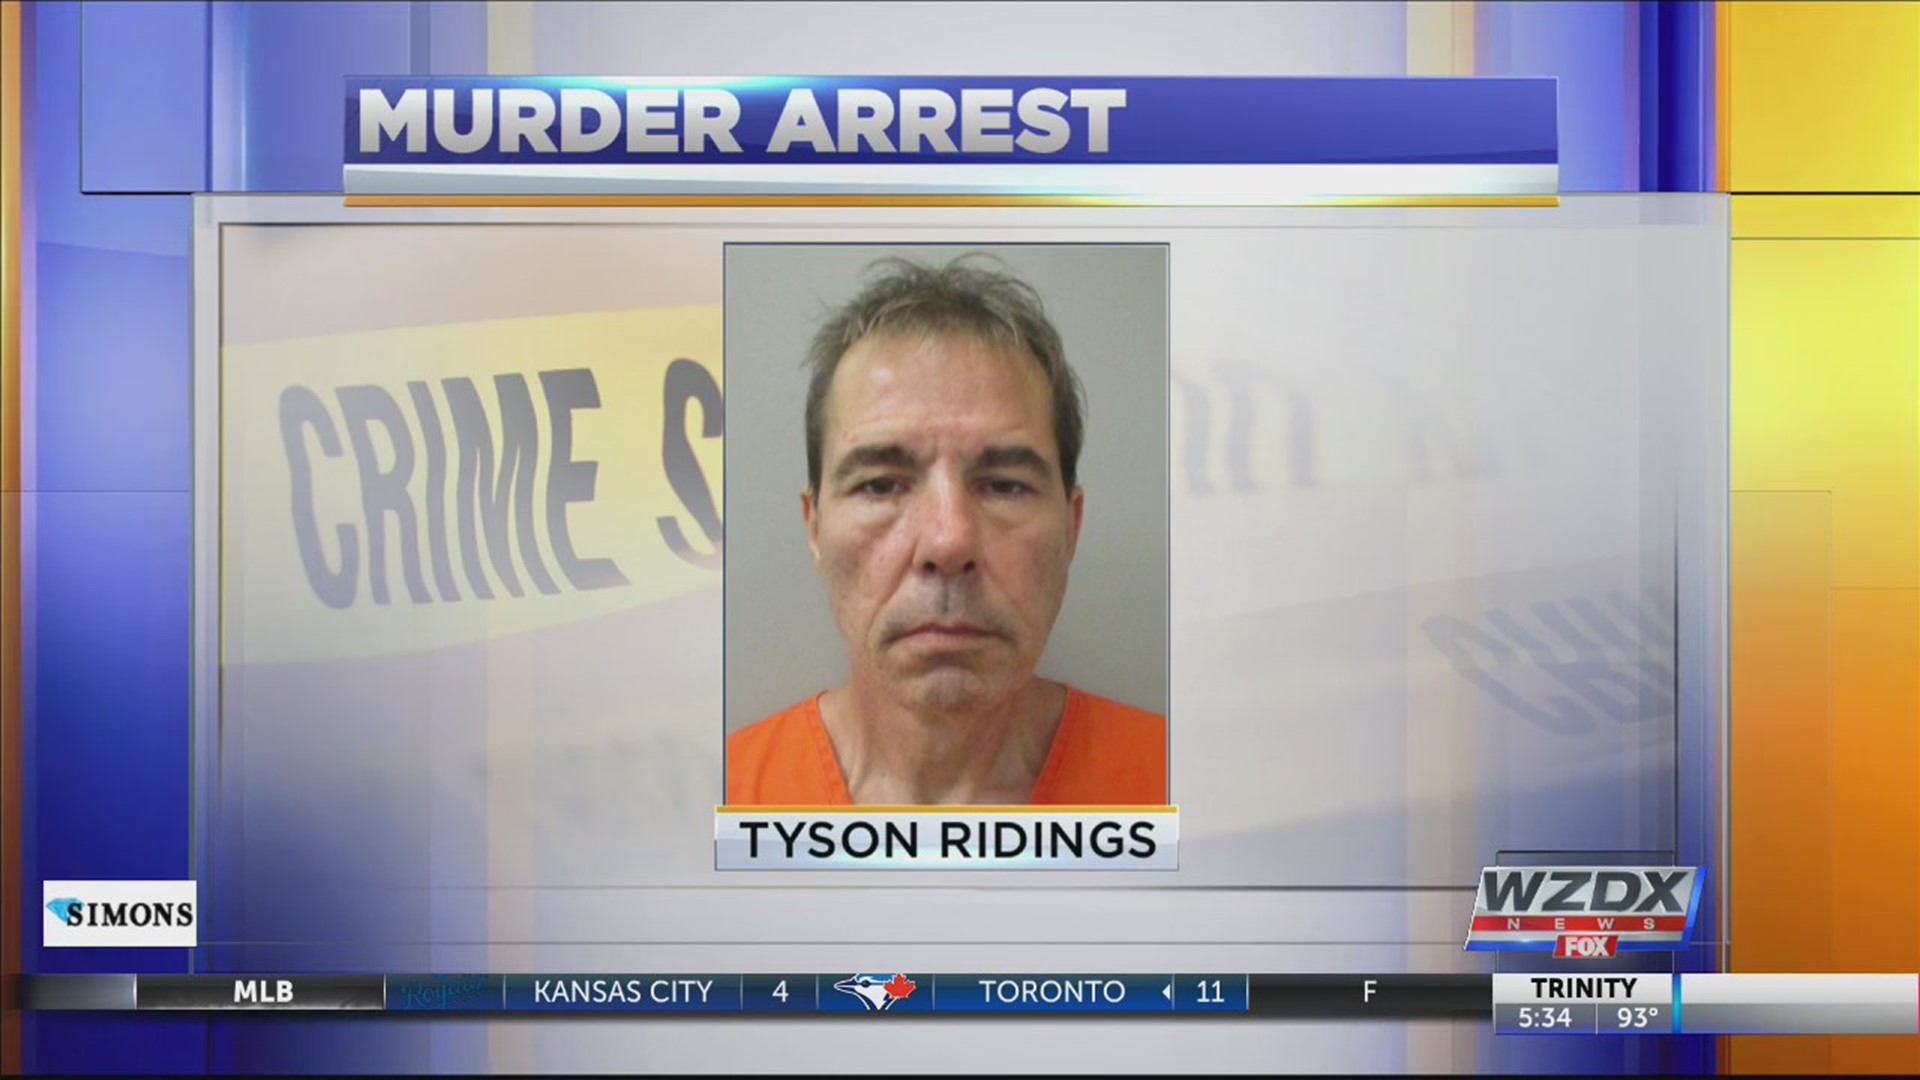 An man is in Madison County Jail for allegedly murdering his wife.